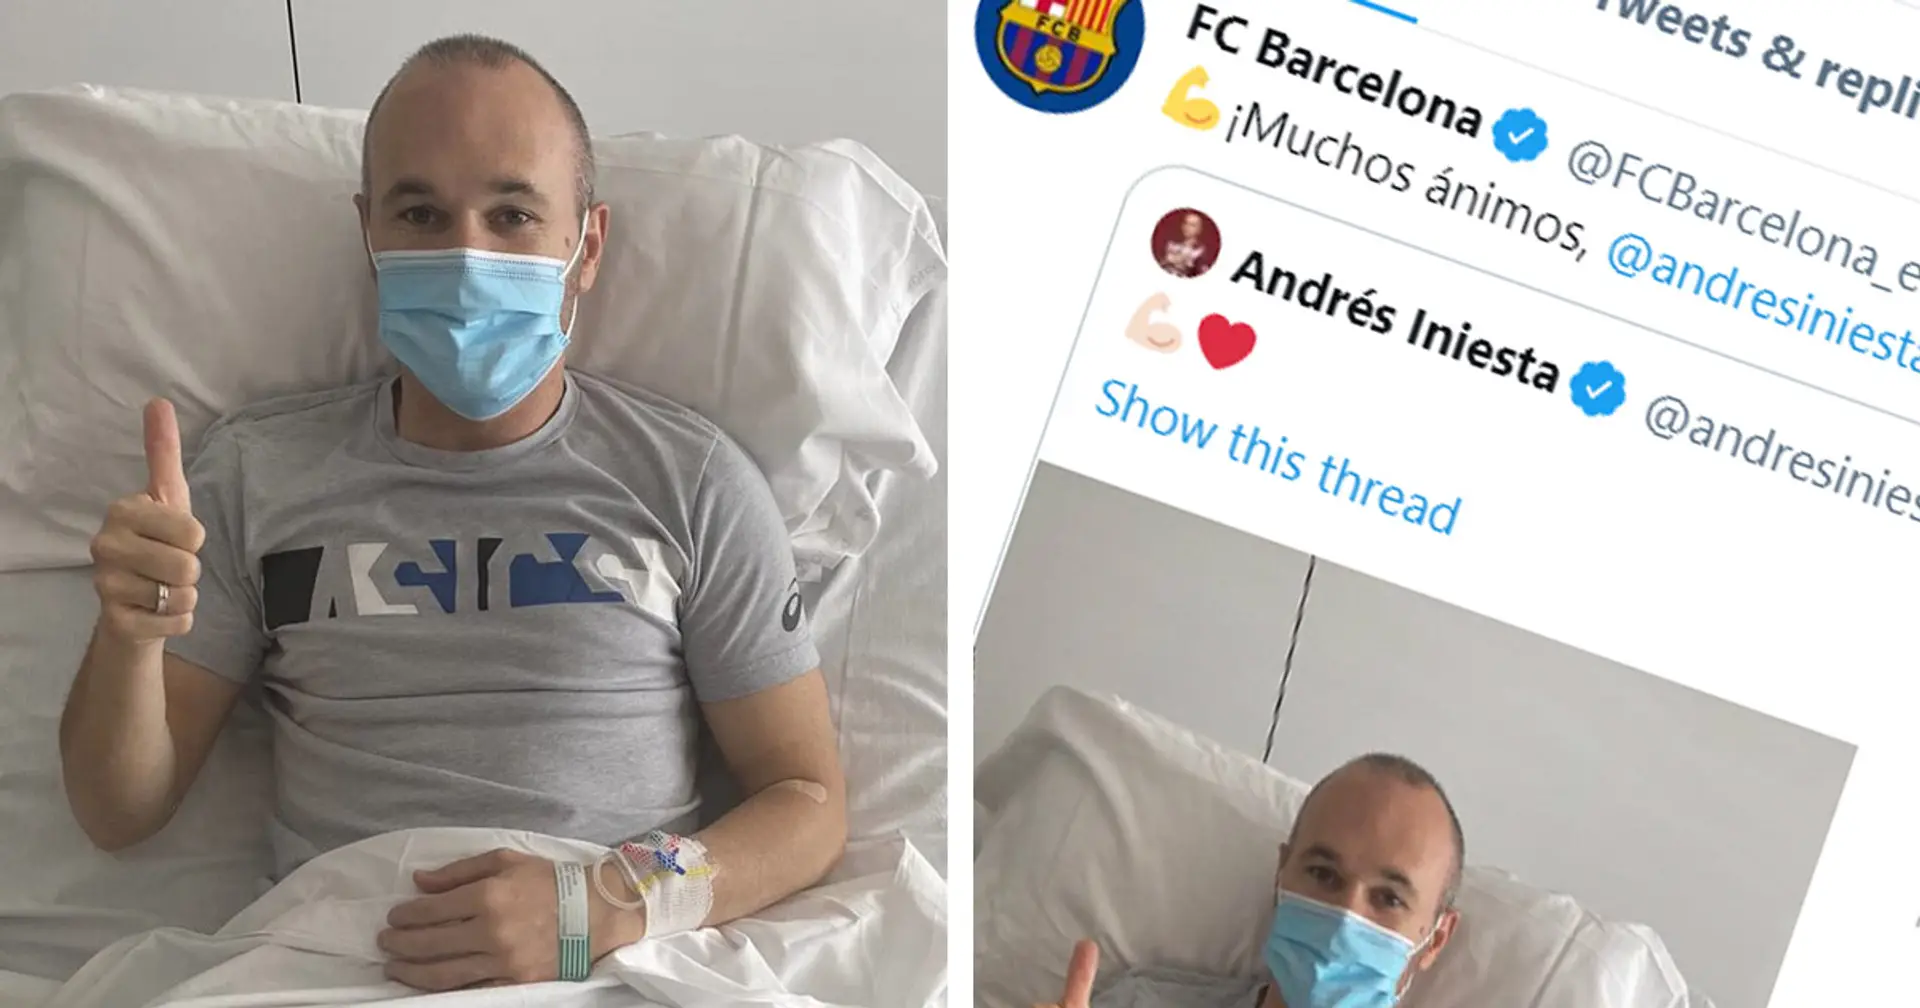 Barca send message to Andres Iniesta after Spaniard's hip surgery